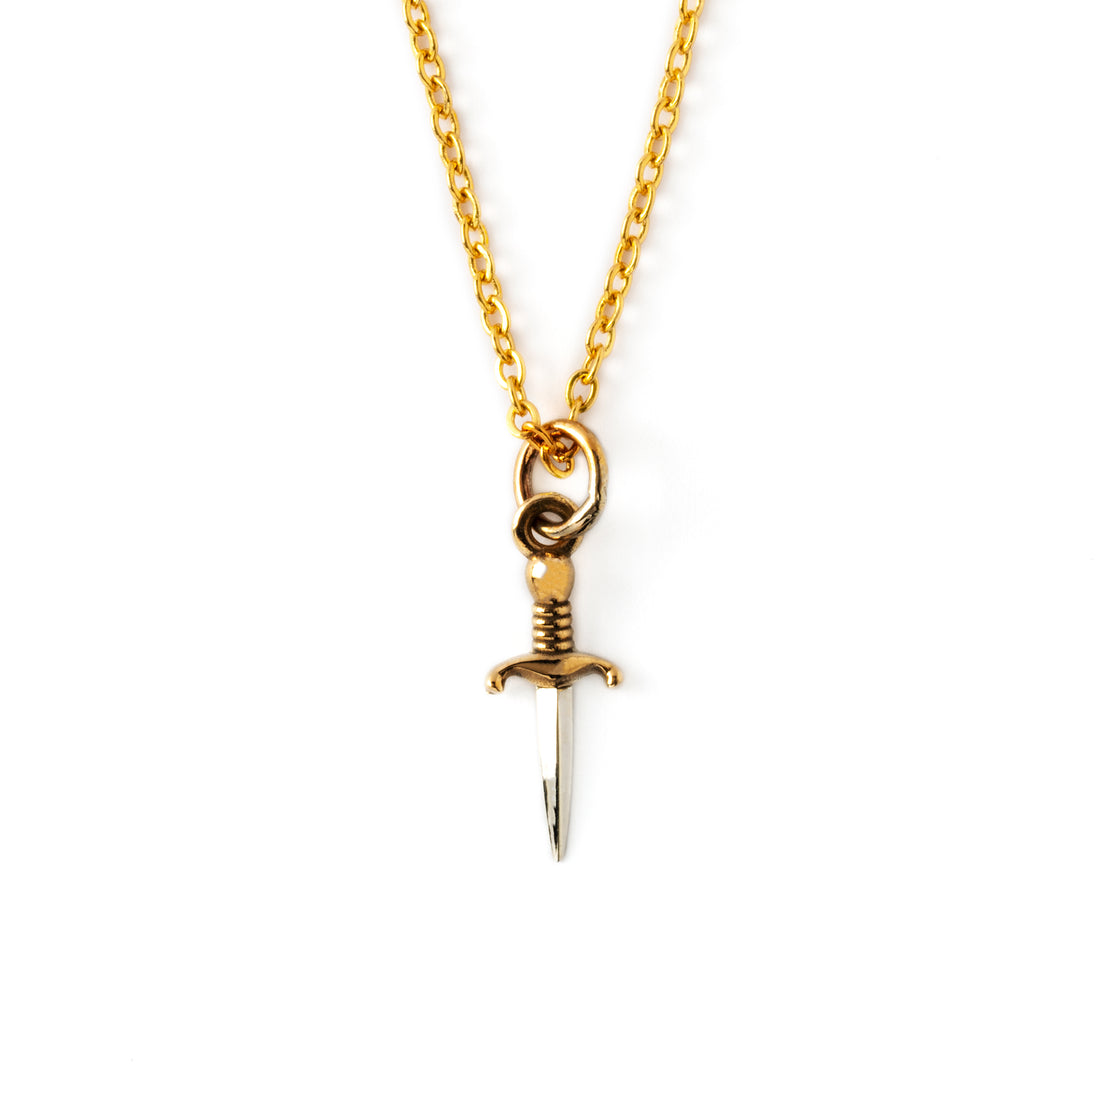  Gawain dagger charm necklace frontal view